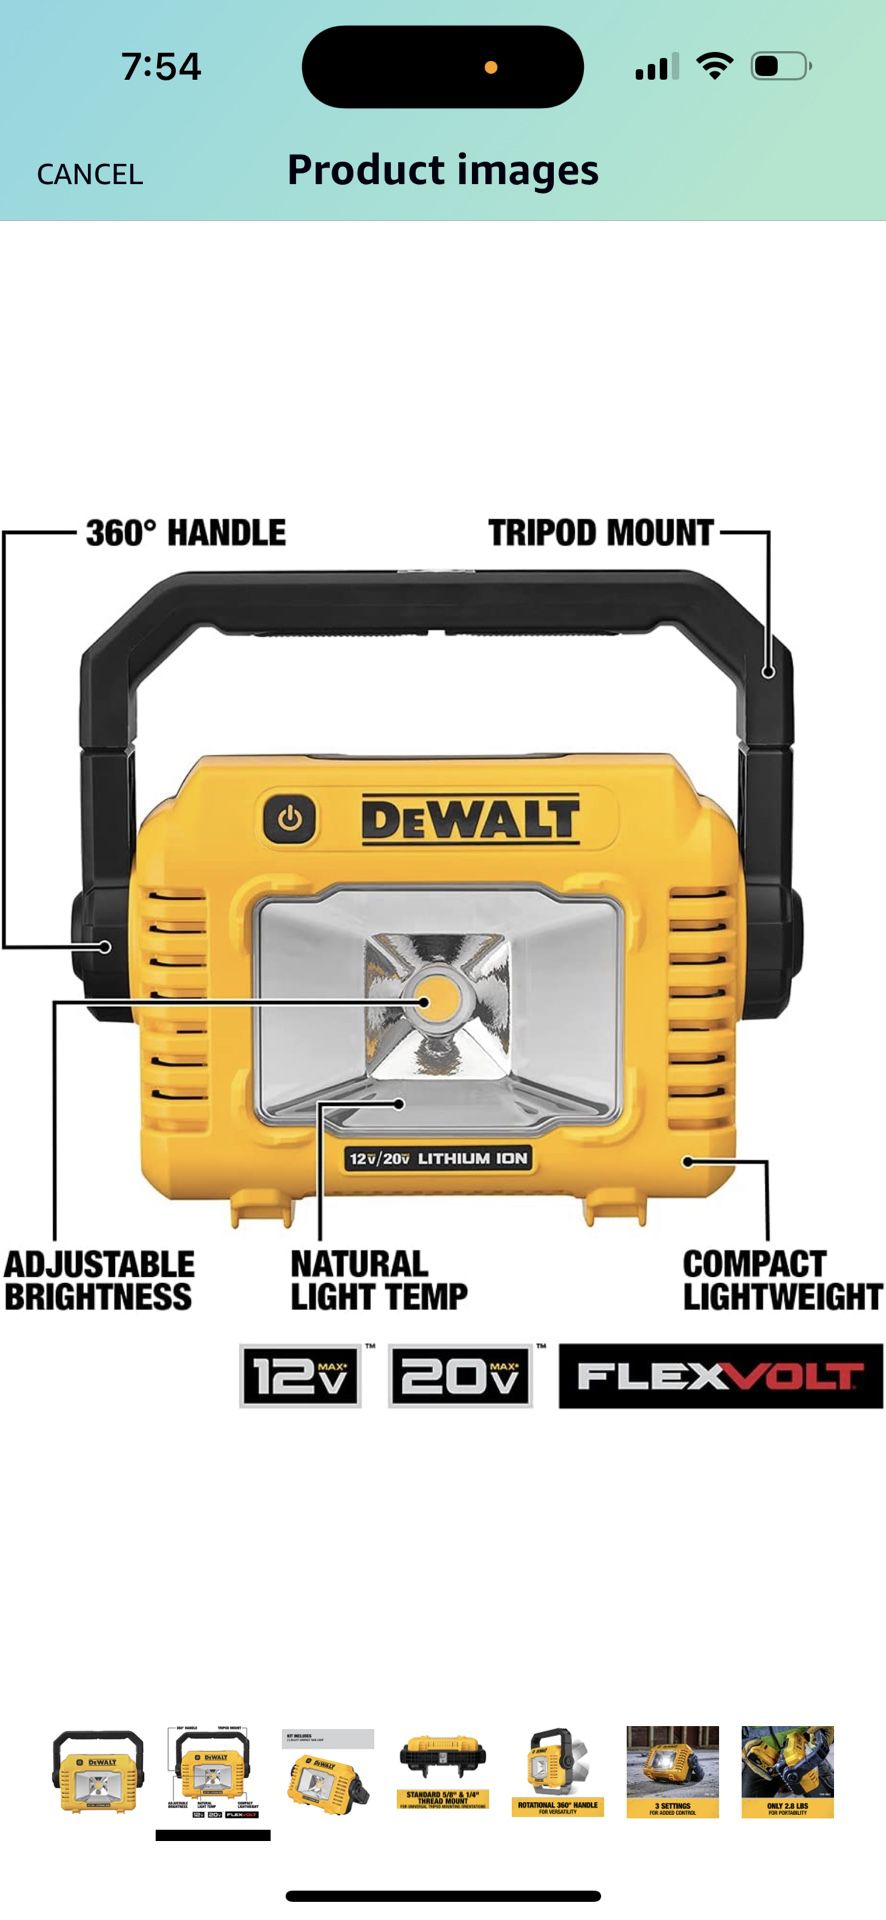 DEWALT 12V/20V MAX LED Work Light, Compact with 360 Degree Rotating Handle, 2000  Lumens of Brightness, Cordless, Bare Tool Only for Sale in Houston, TX  OfferUp